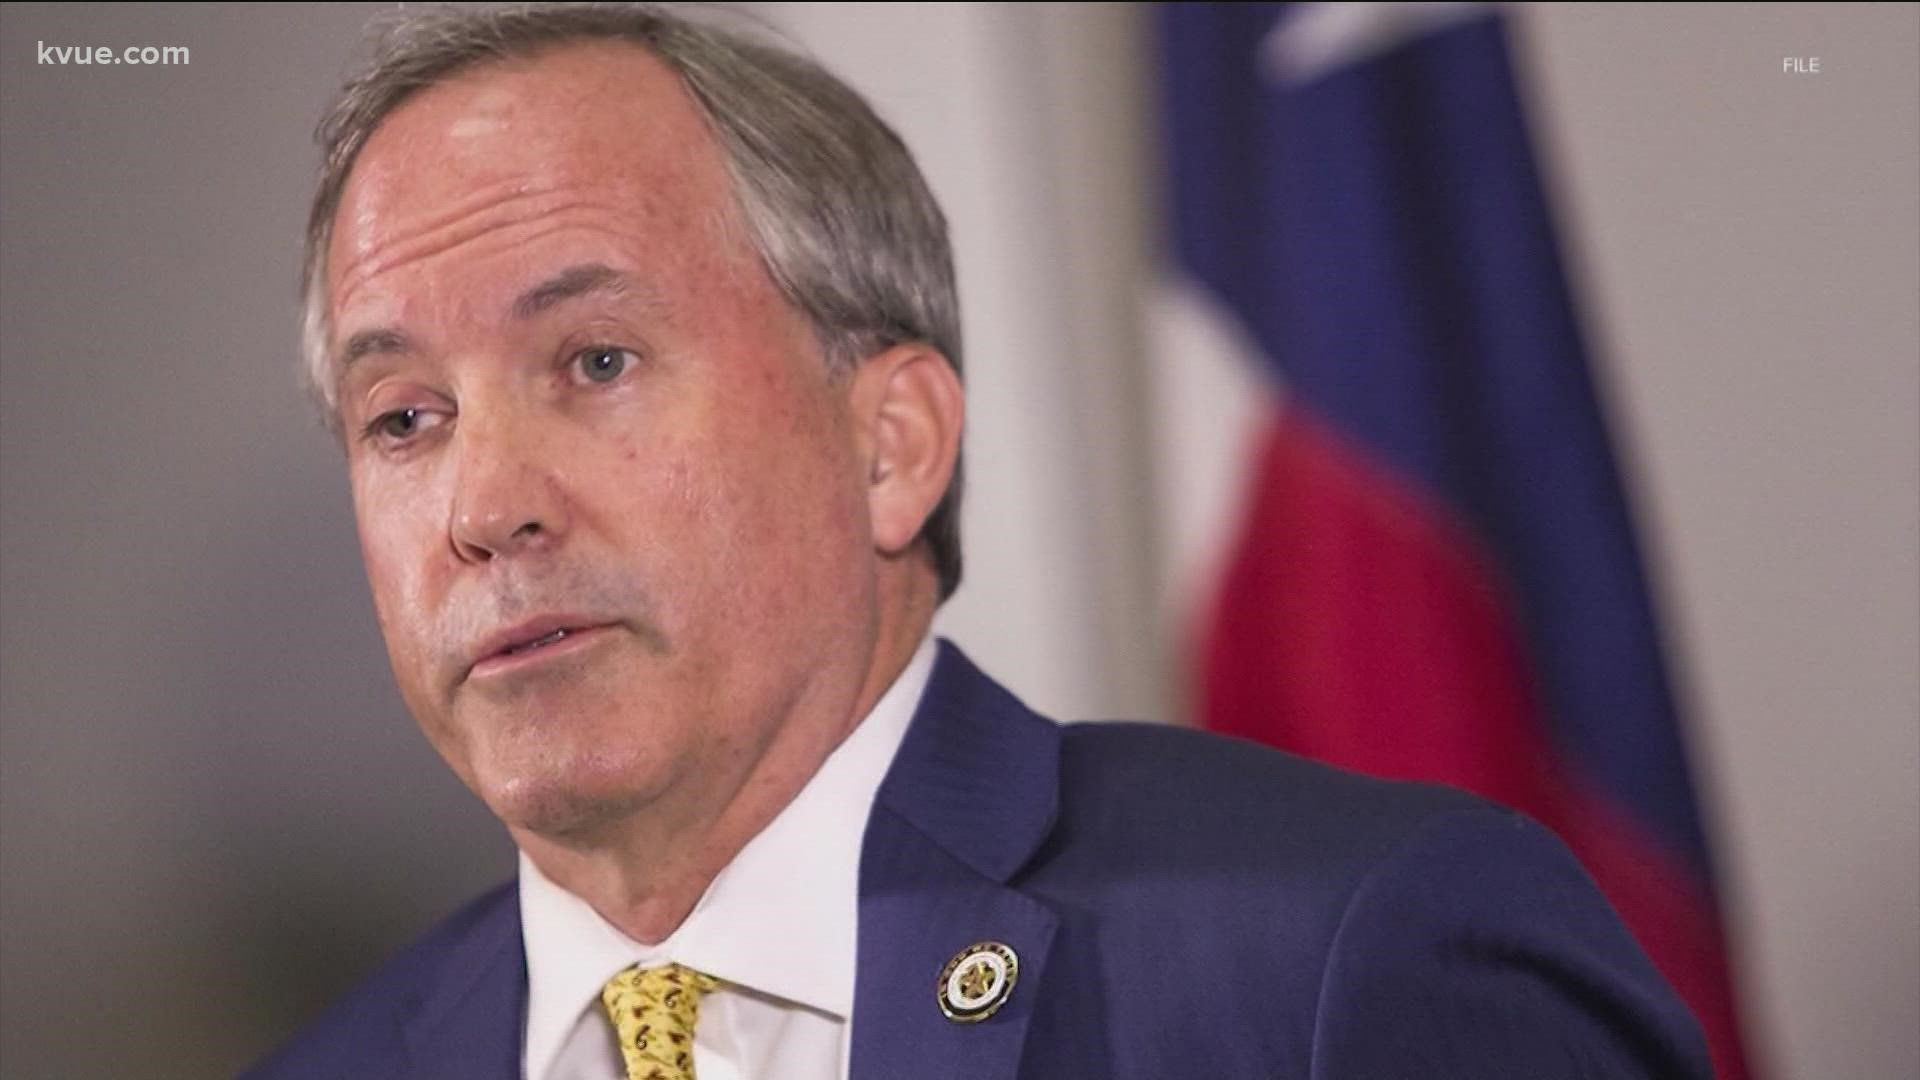 A court said former employees who accused Texas Attorney General Ken Paxton of abuse of power are protected by the state's whistleblower law.